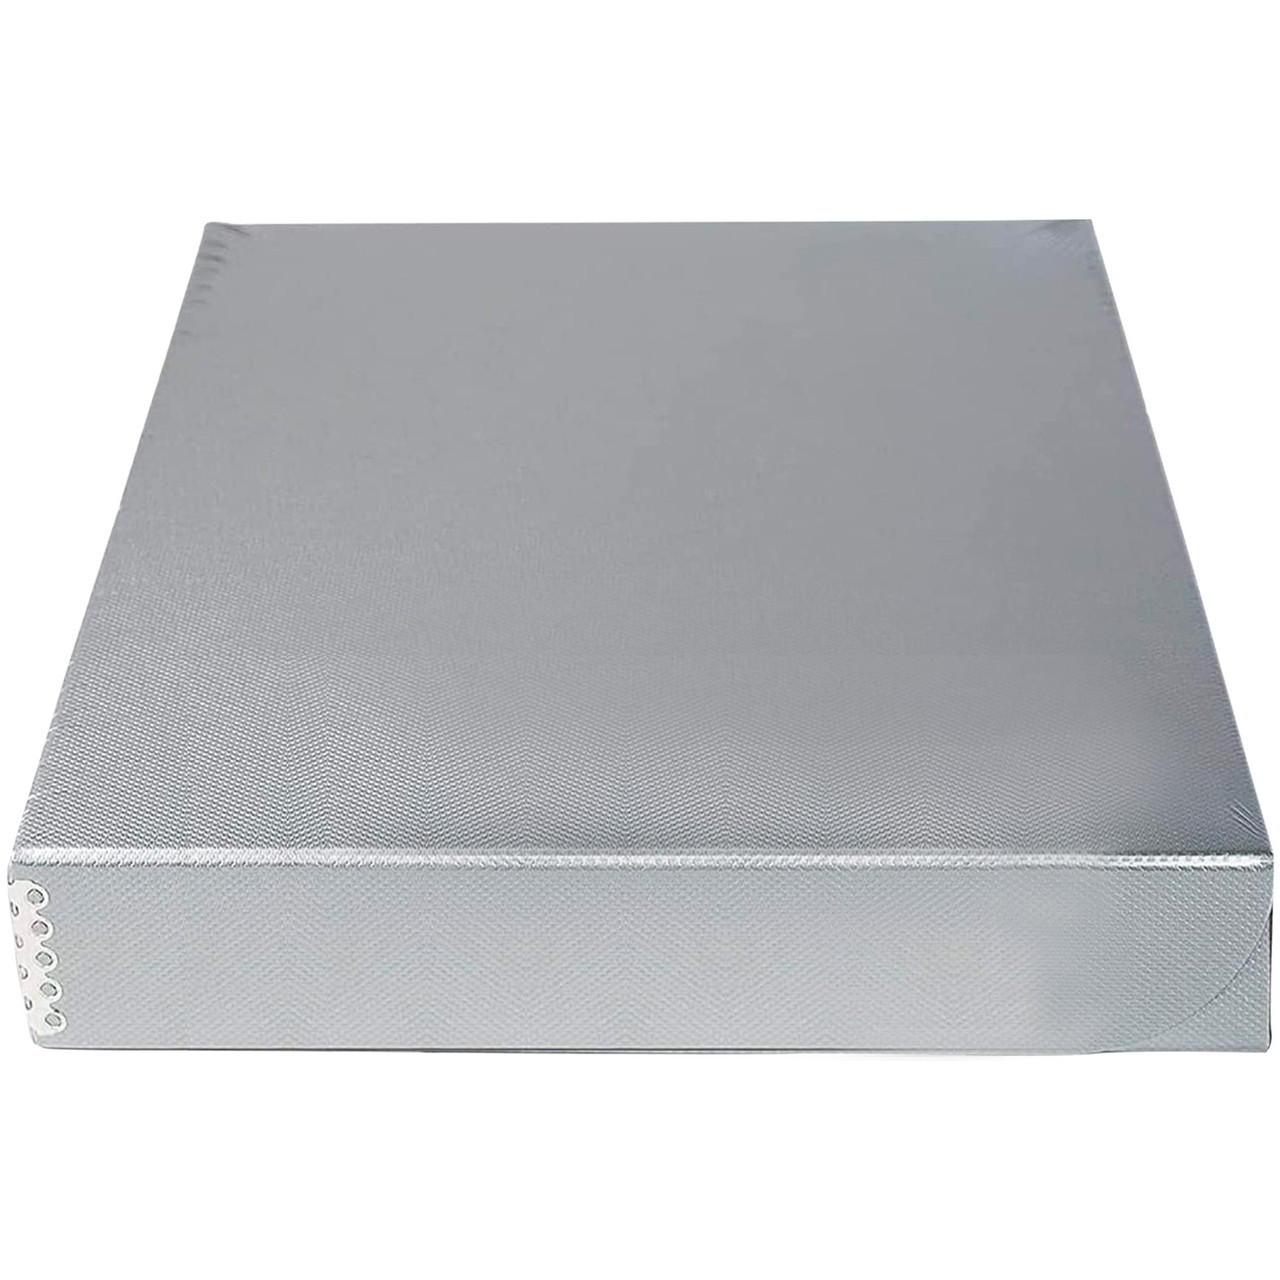 Lineco 9x12 Silver 1.5 Deep Clamshell Archival Folio Storage Box Removable  Lid Acid-Free with Metal Edge